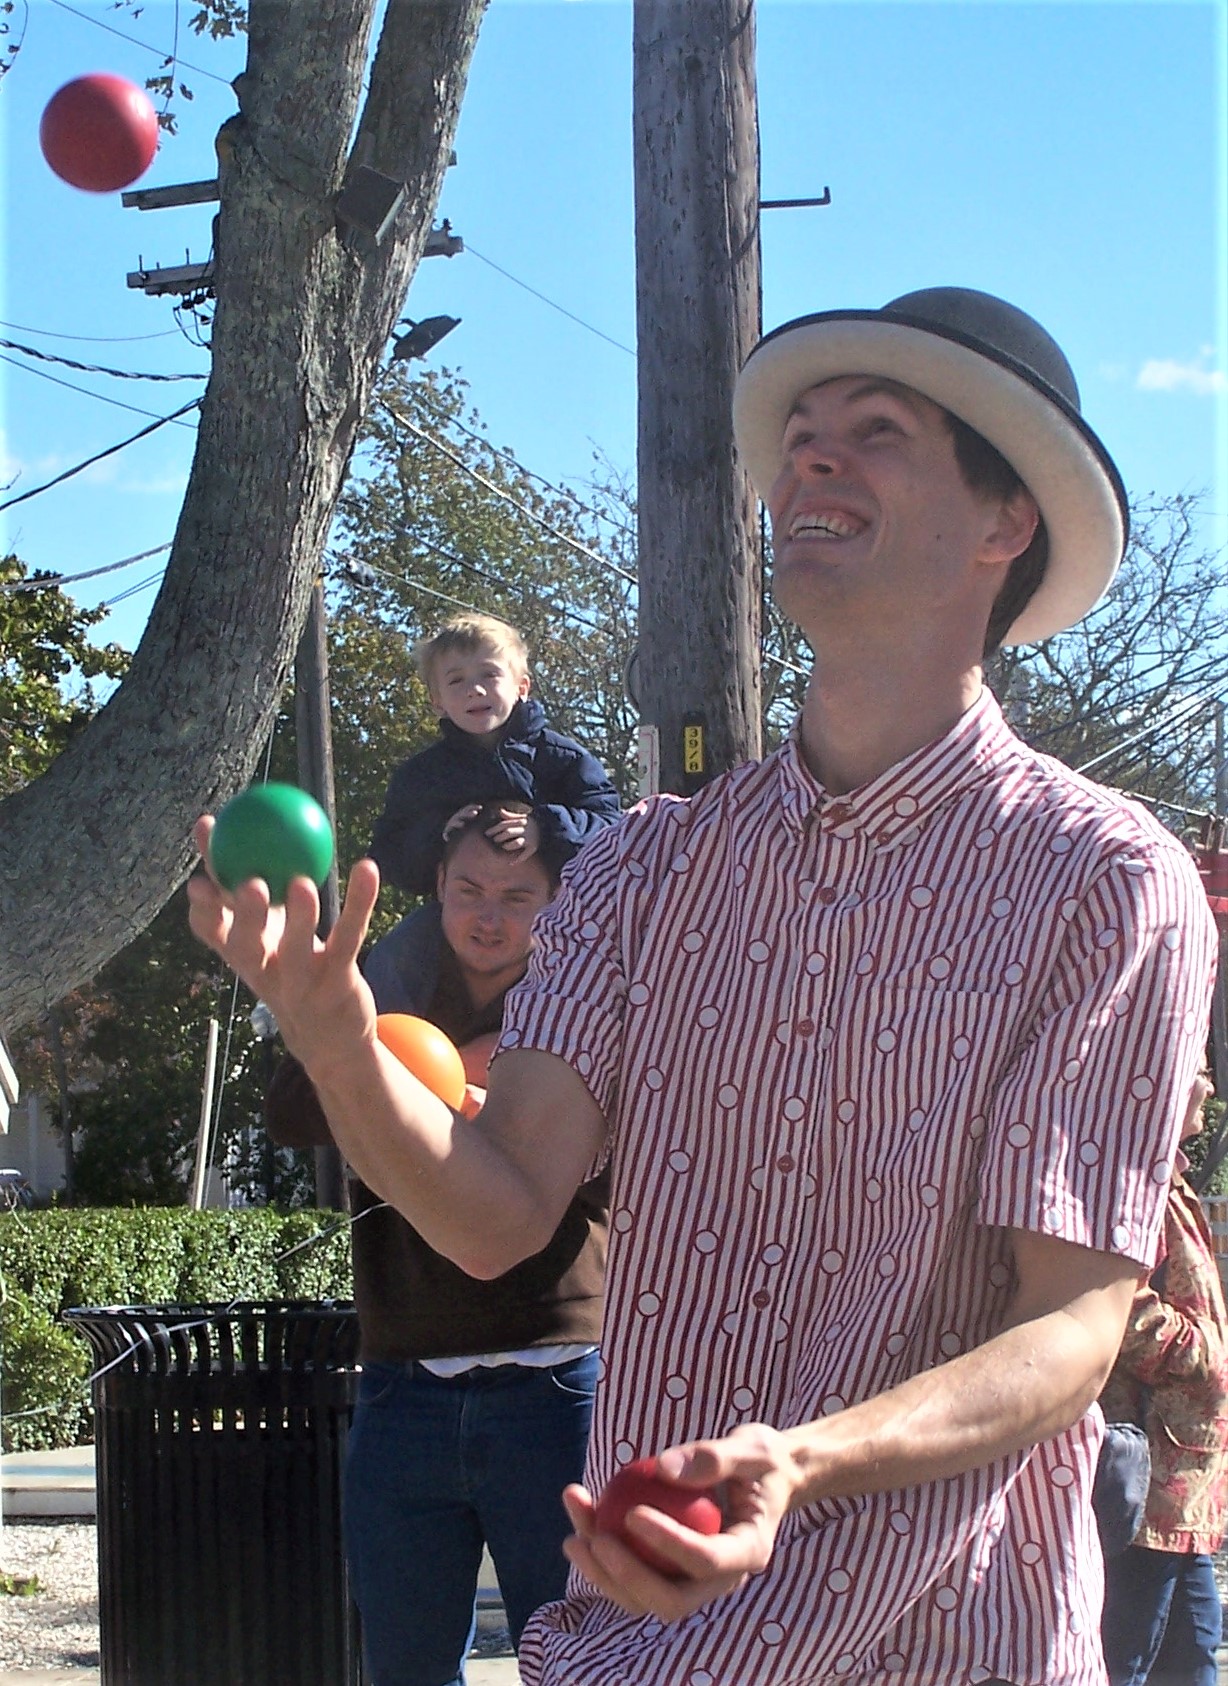 Trevor the Juggler will amaze and delight at Sunday’s Hyannis Open Streets